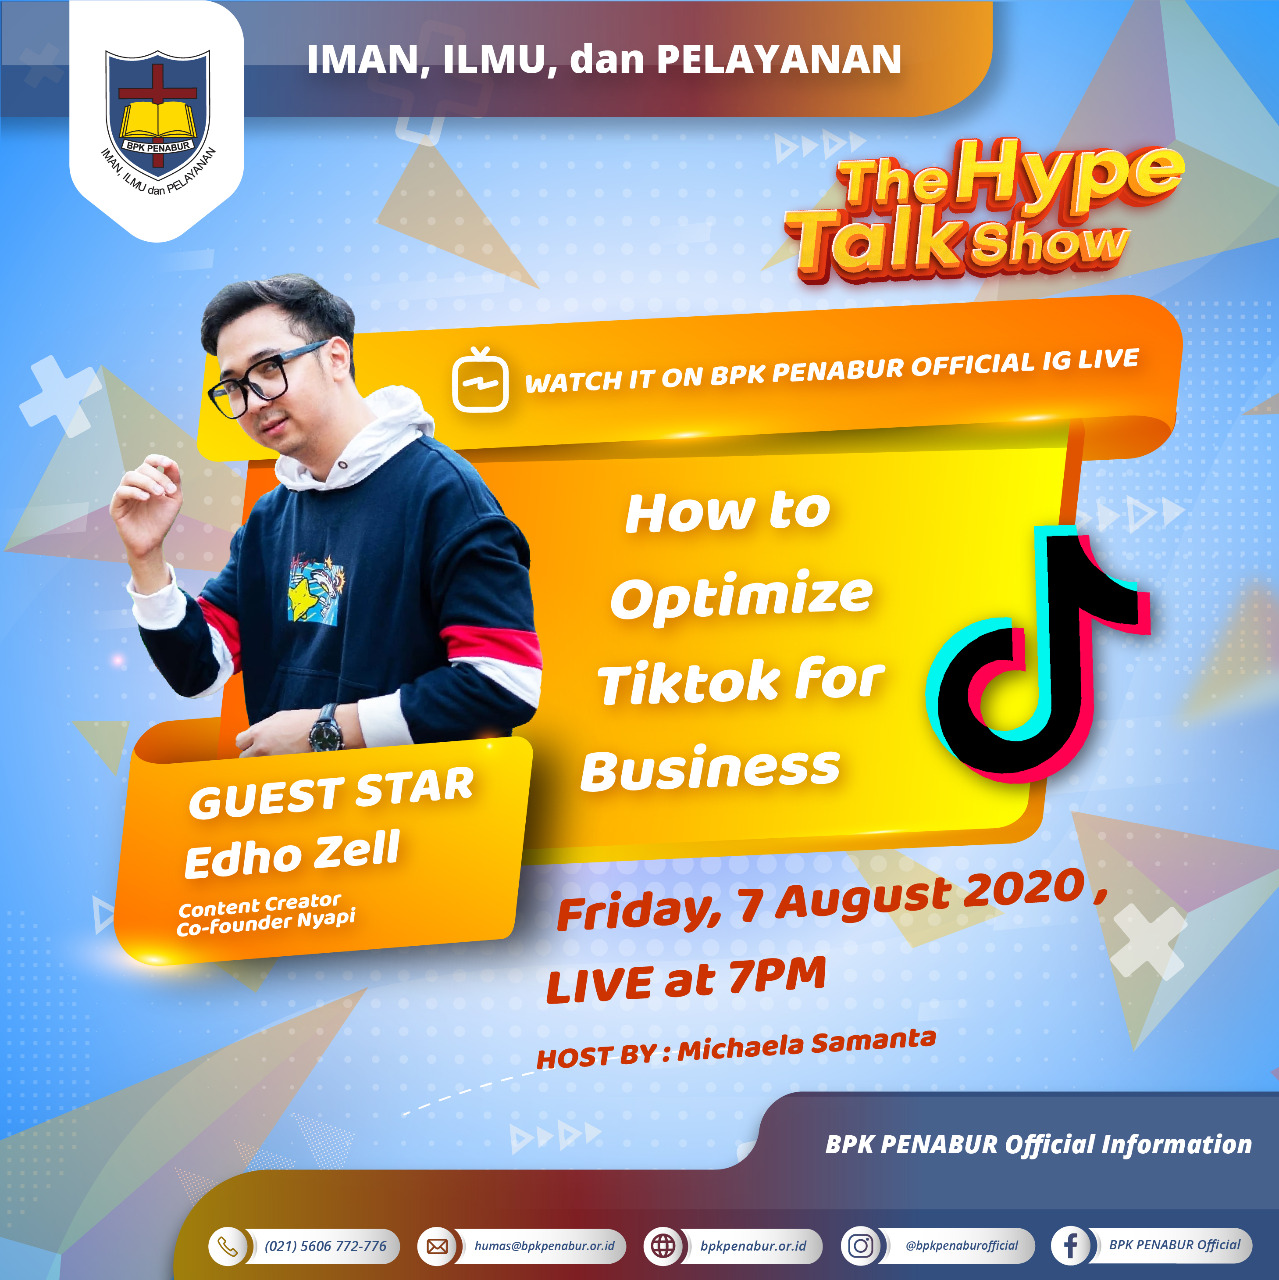 The Hype Talk Show: How to Optimize Tiktok for Business